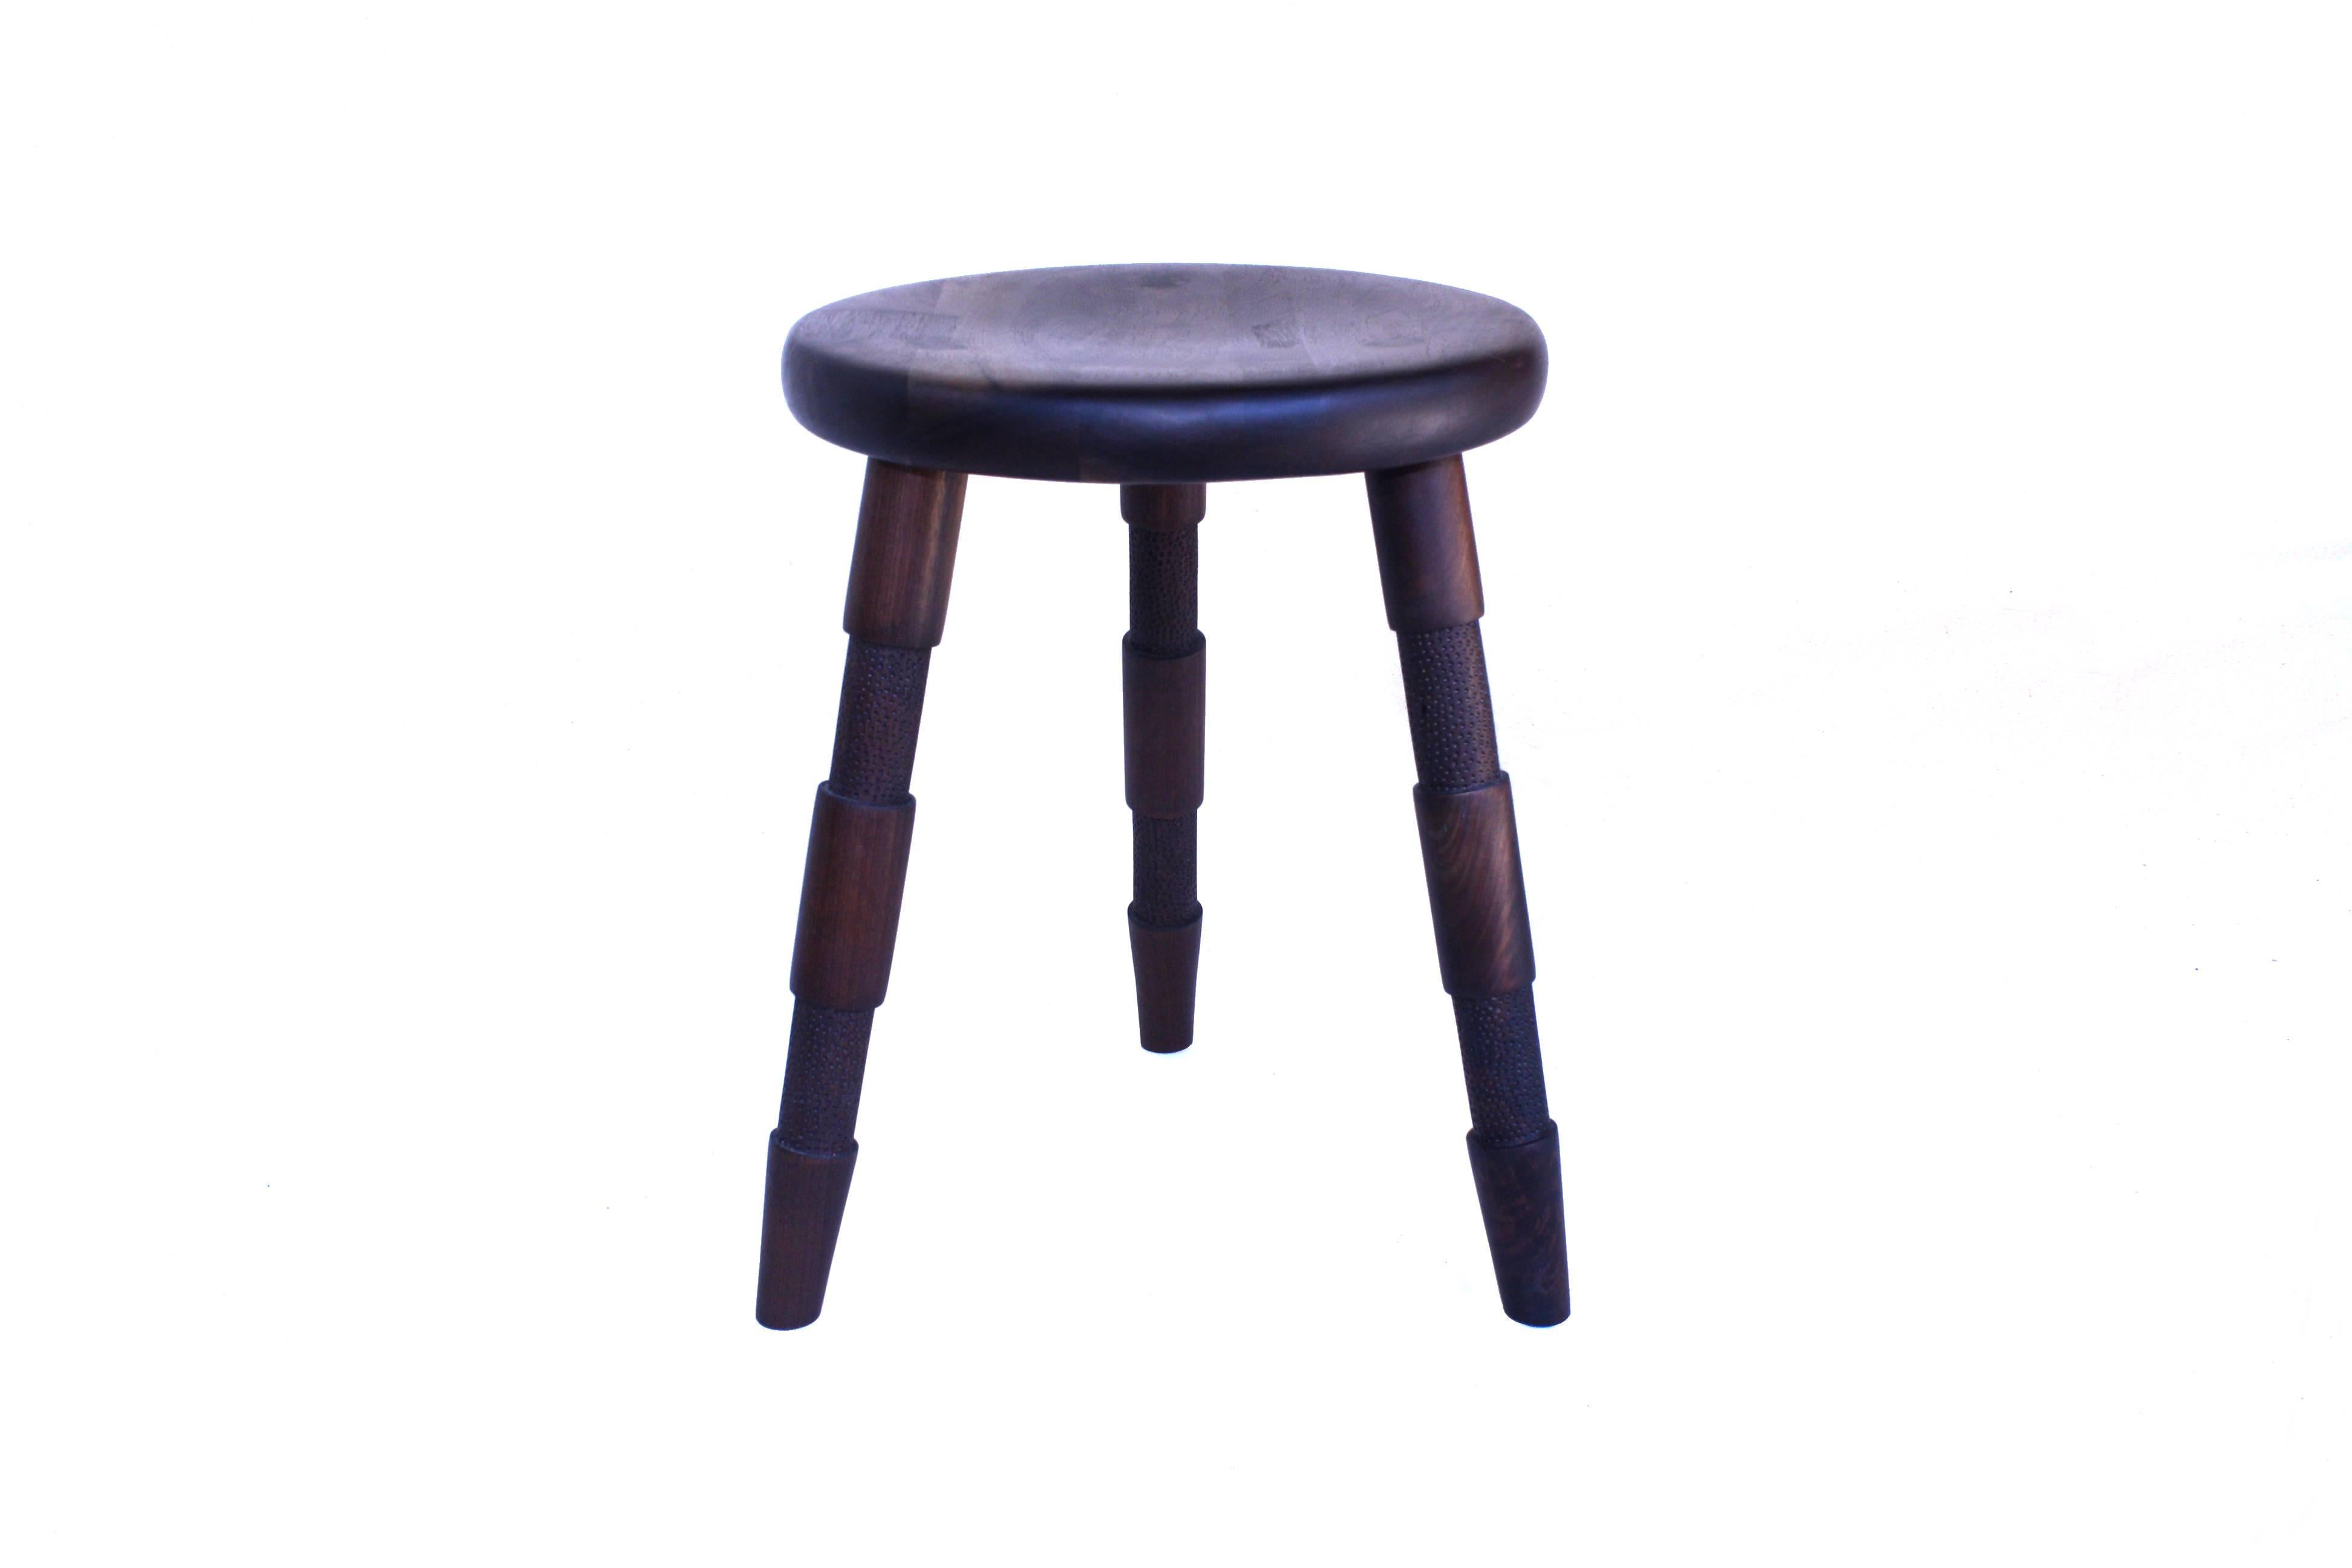 Handmade in Chicago by Laylo Studio, this solid wood stool features turned and textured legs that are joined to the hand-carved seat using through wedged, tapered tenons - a method of joinery found in Windsor chairs. The joinery locking the legs in